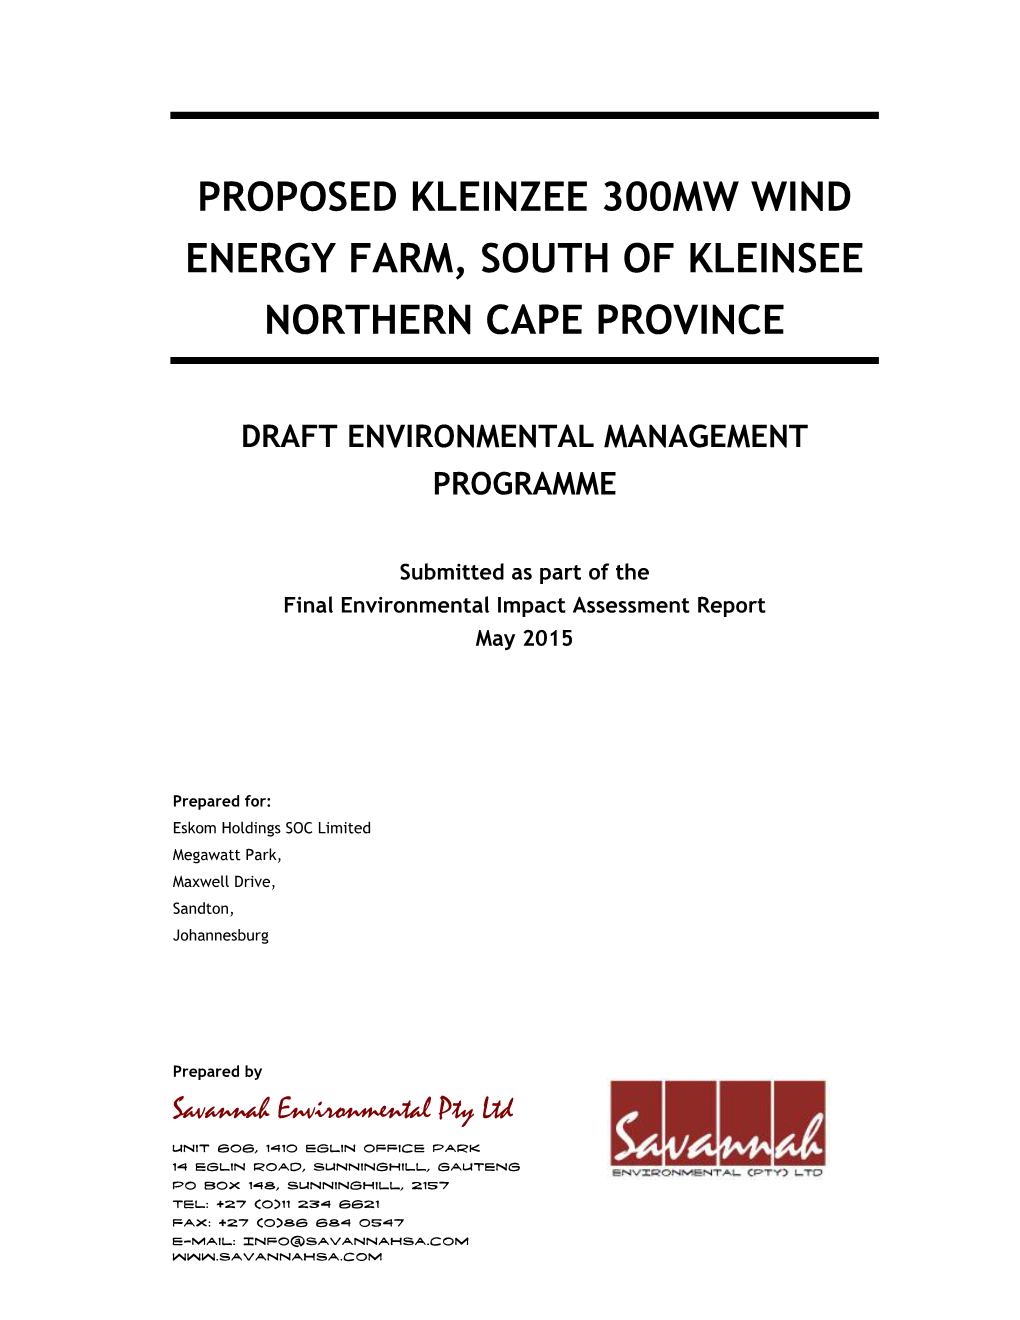 Proposed Kleinzee 300Mw Wind Energy Farm, South of Kleinsee Northern Cape Province